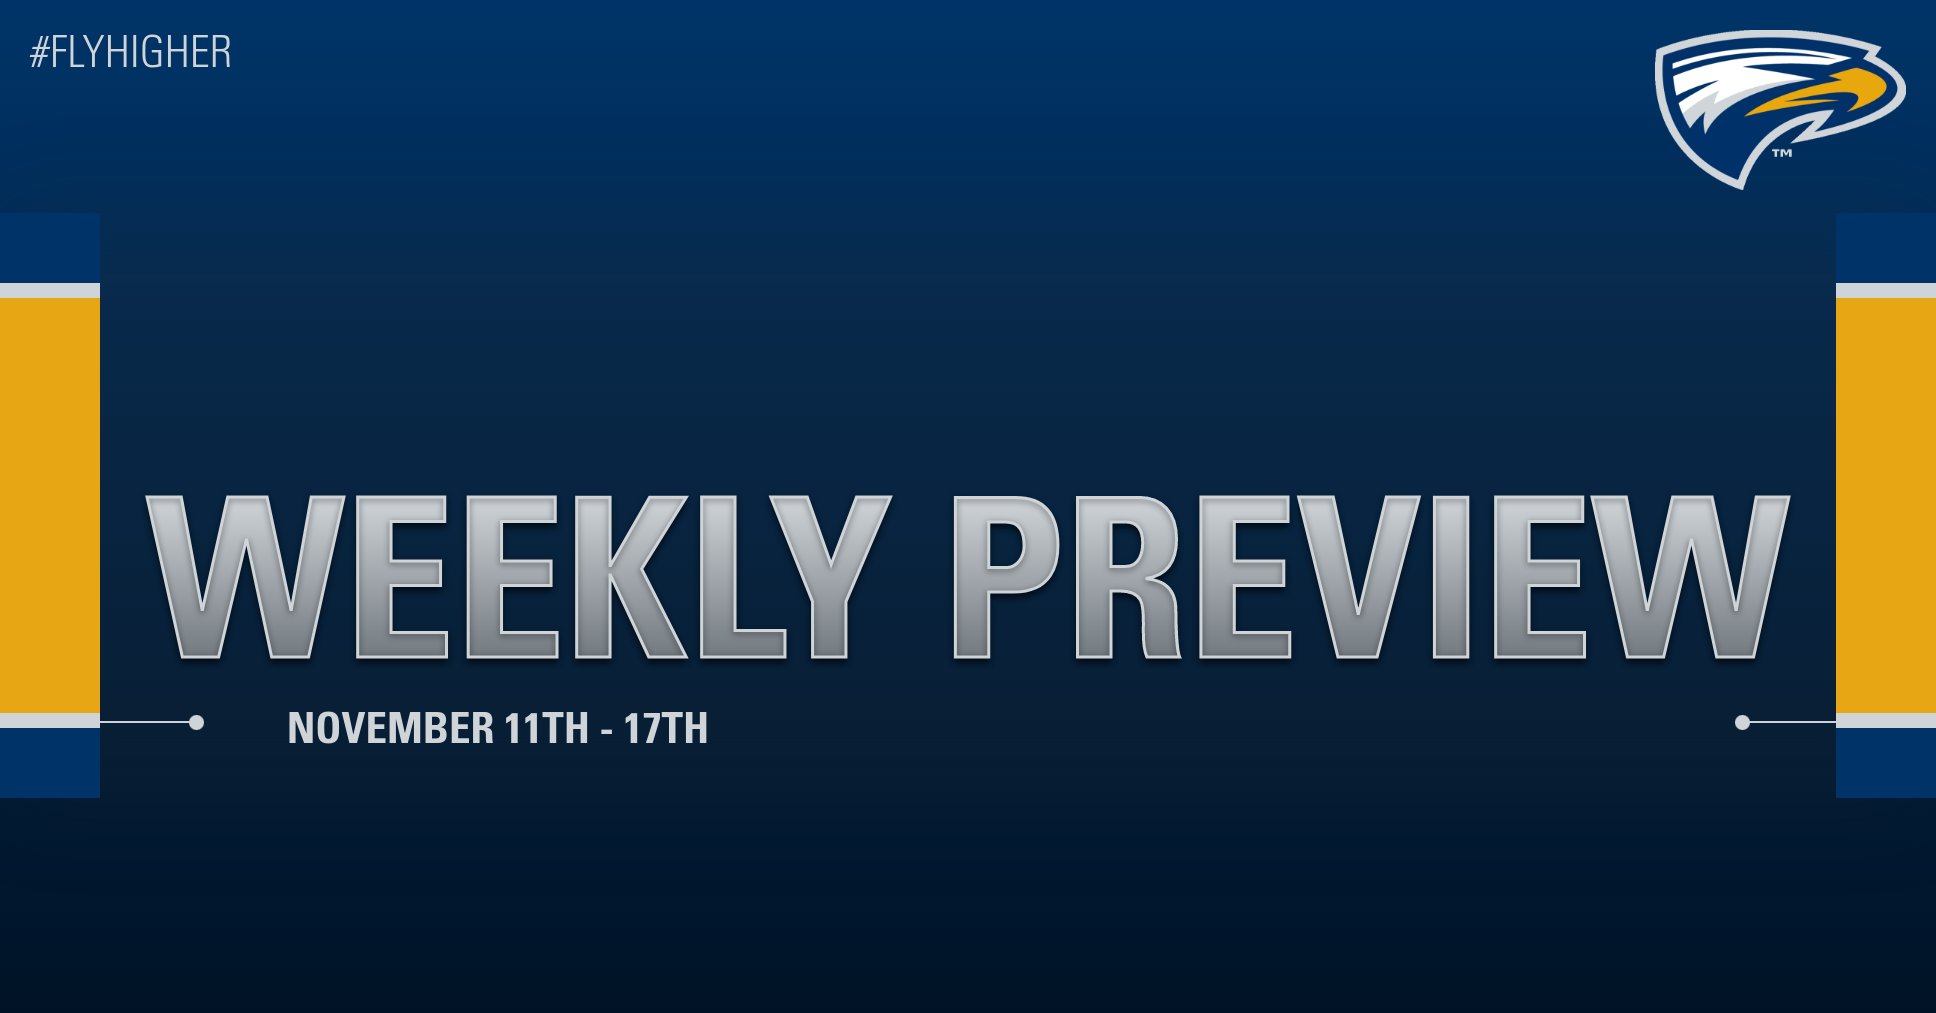 Emory Athletics Weekly Preview - November 11th - 17th